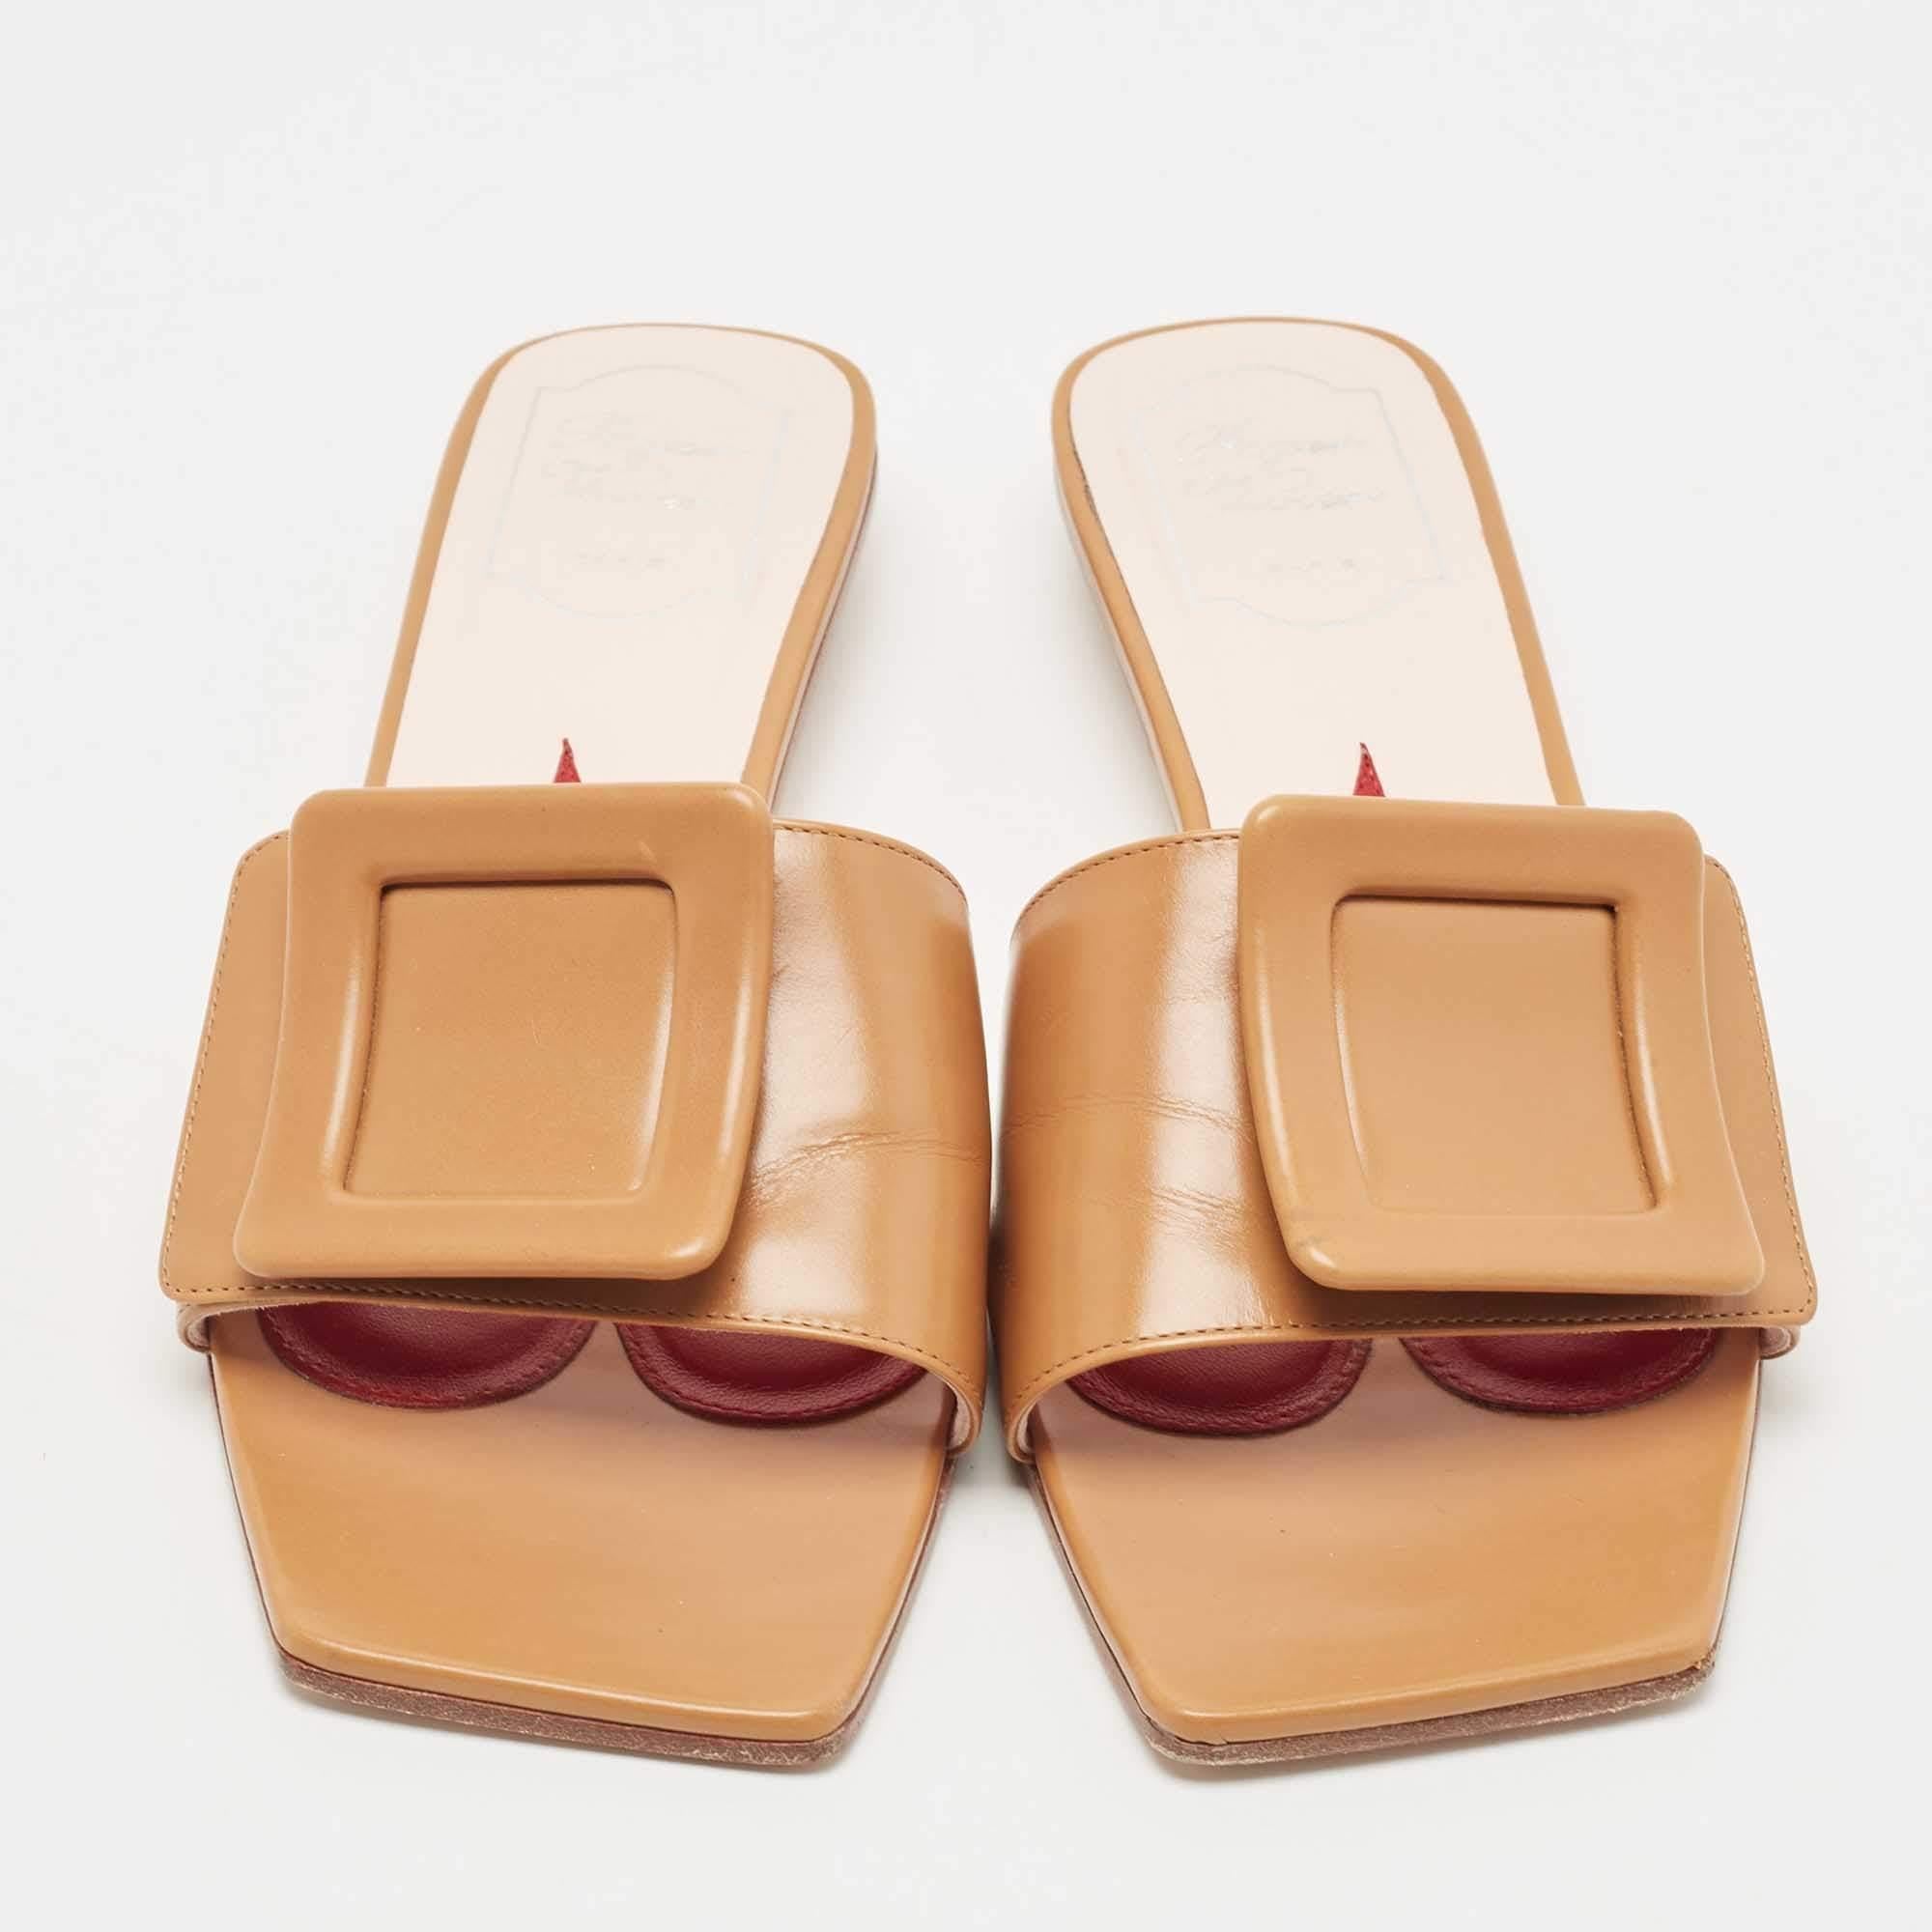 Enhance your casual looks with a touch of high style with these designer slides. Rendered in quality material with a lovely hue adorning its expanse, this pair is a must-have!

Includes: Original Box, Original Dustbag, Info Booklet

